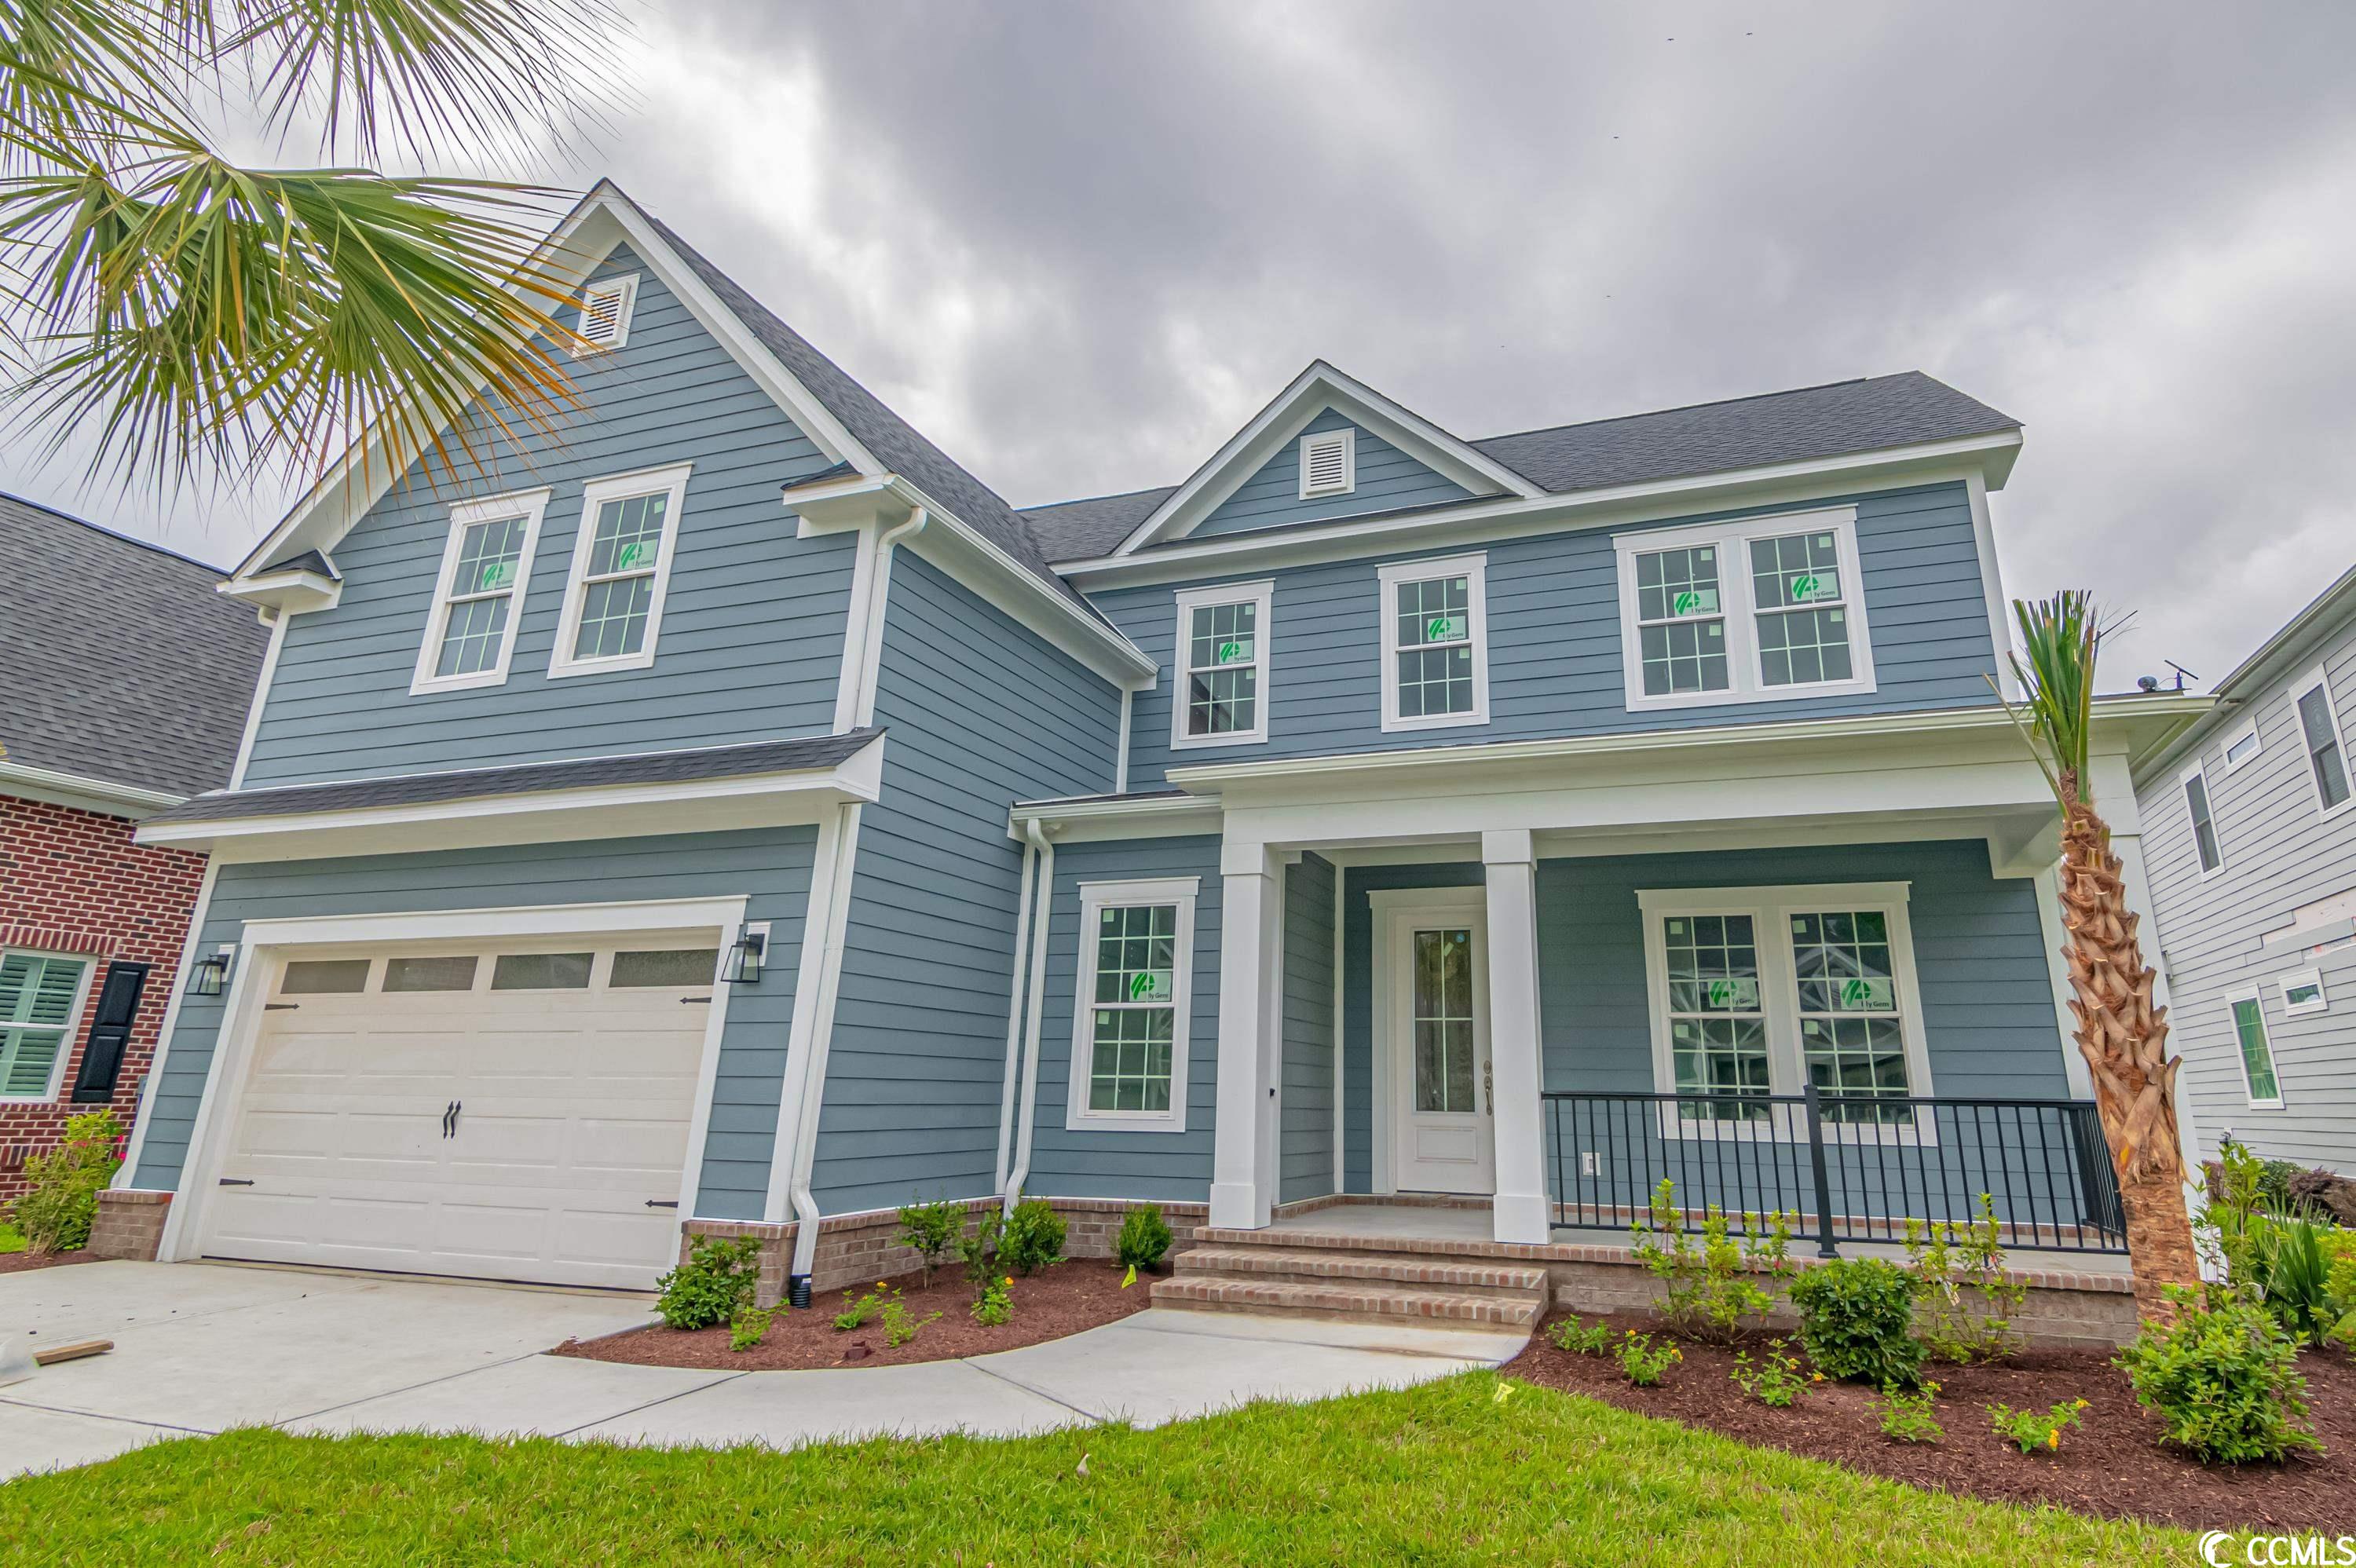 1132 East Isle of Palms Ave. Myrtle Beach, SC 29579